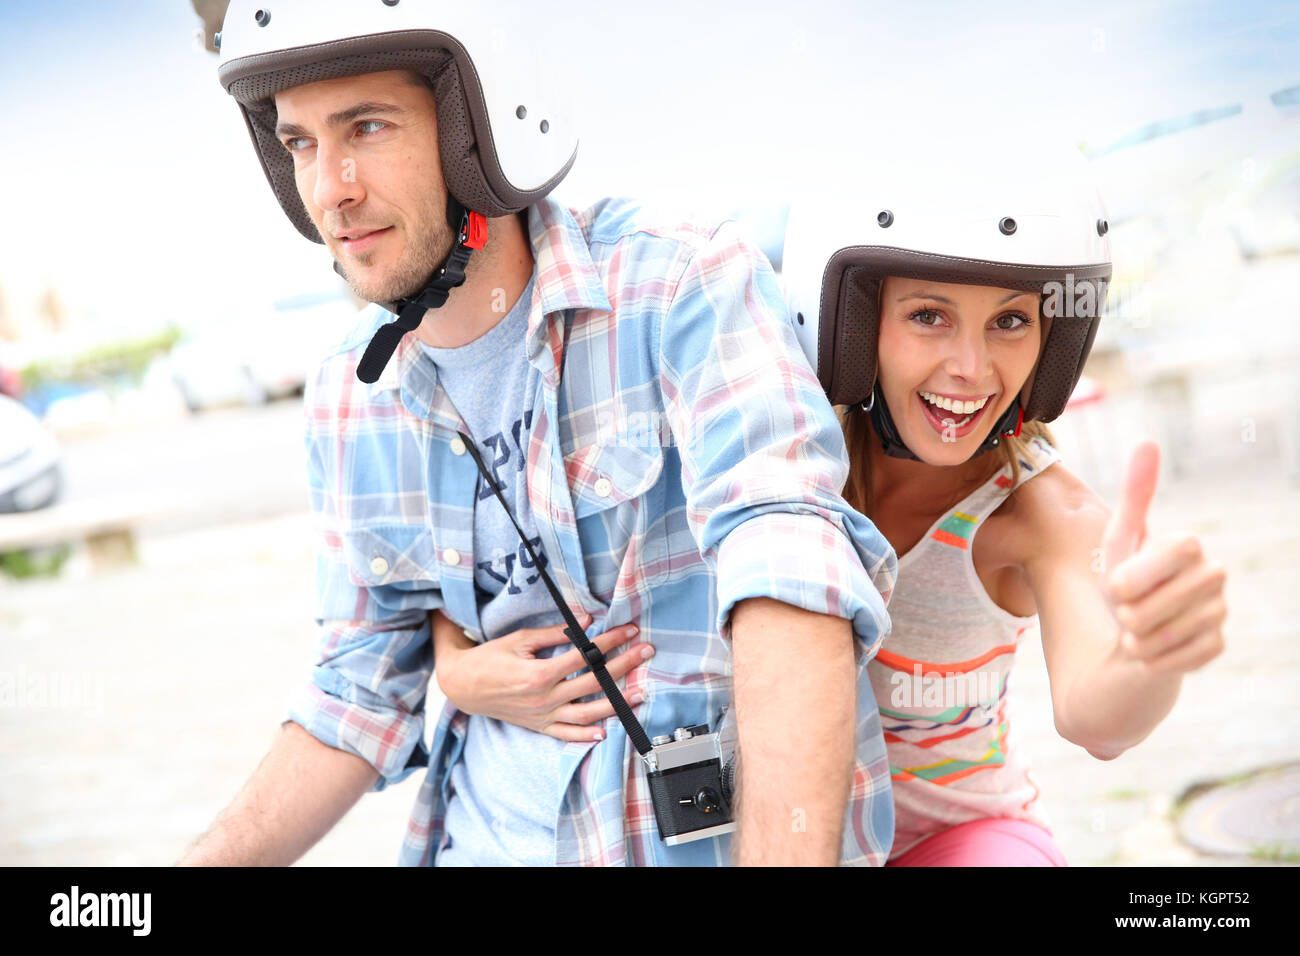 Girl riding moto with boyfriend and showing thumb up Stock Photo